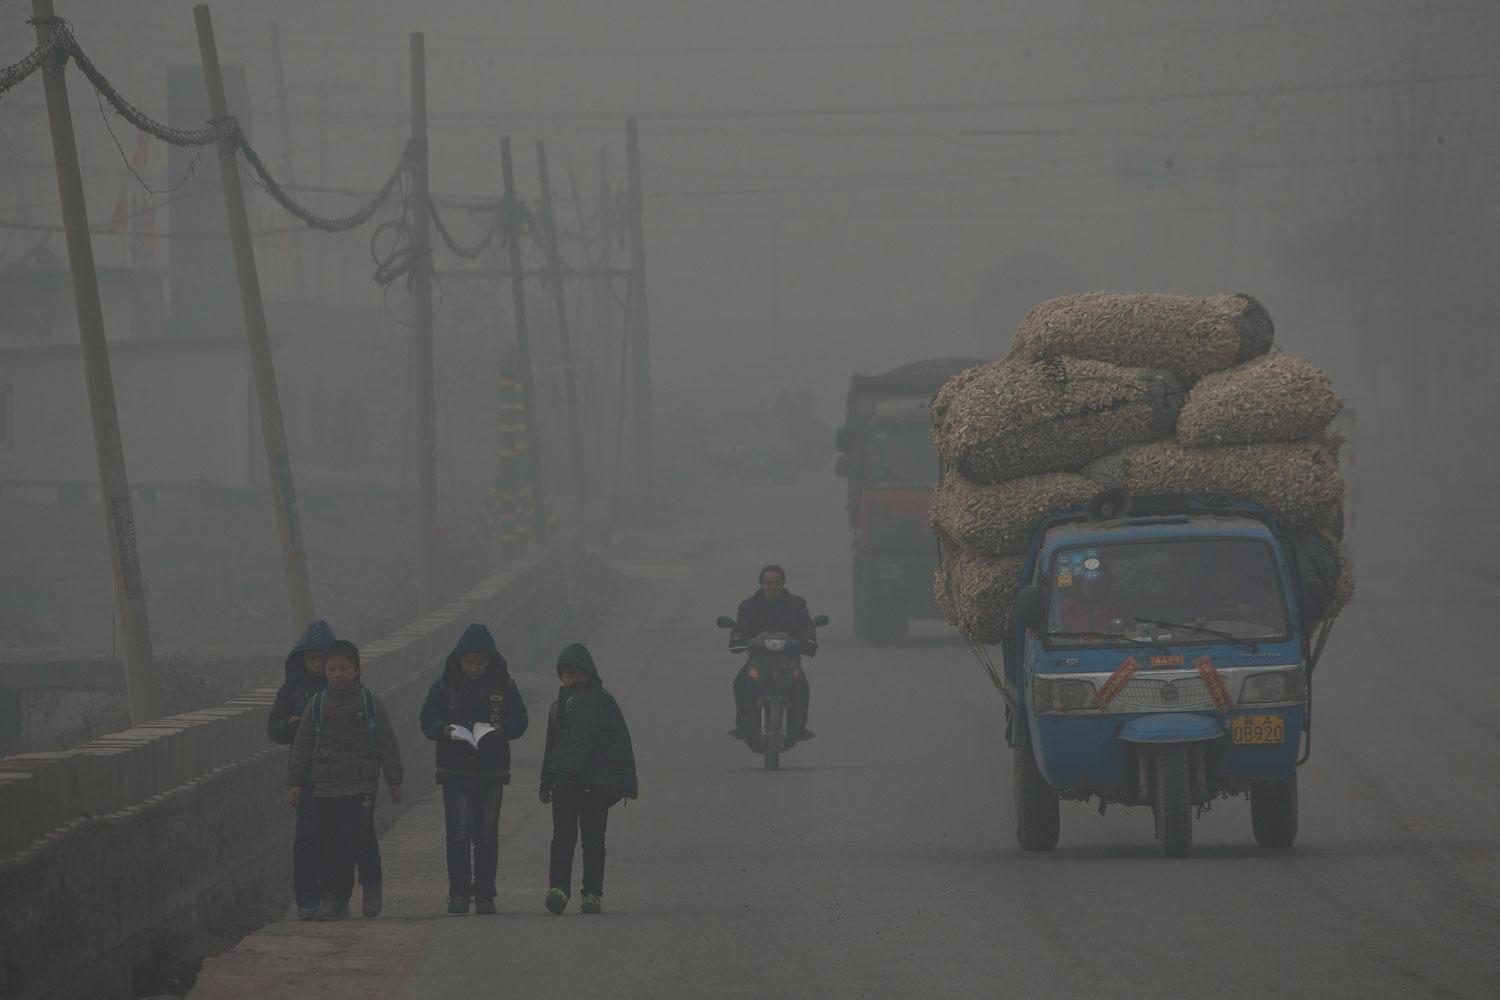 Children walk back home after school on a severely polluted day in Shijiazhuang, in northern China's Hebei province, Feb. 26, 2014.